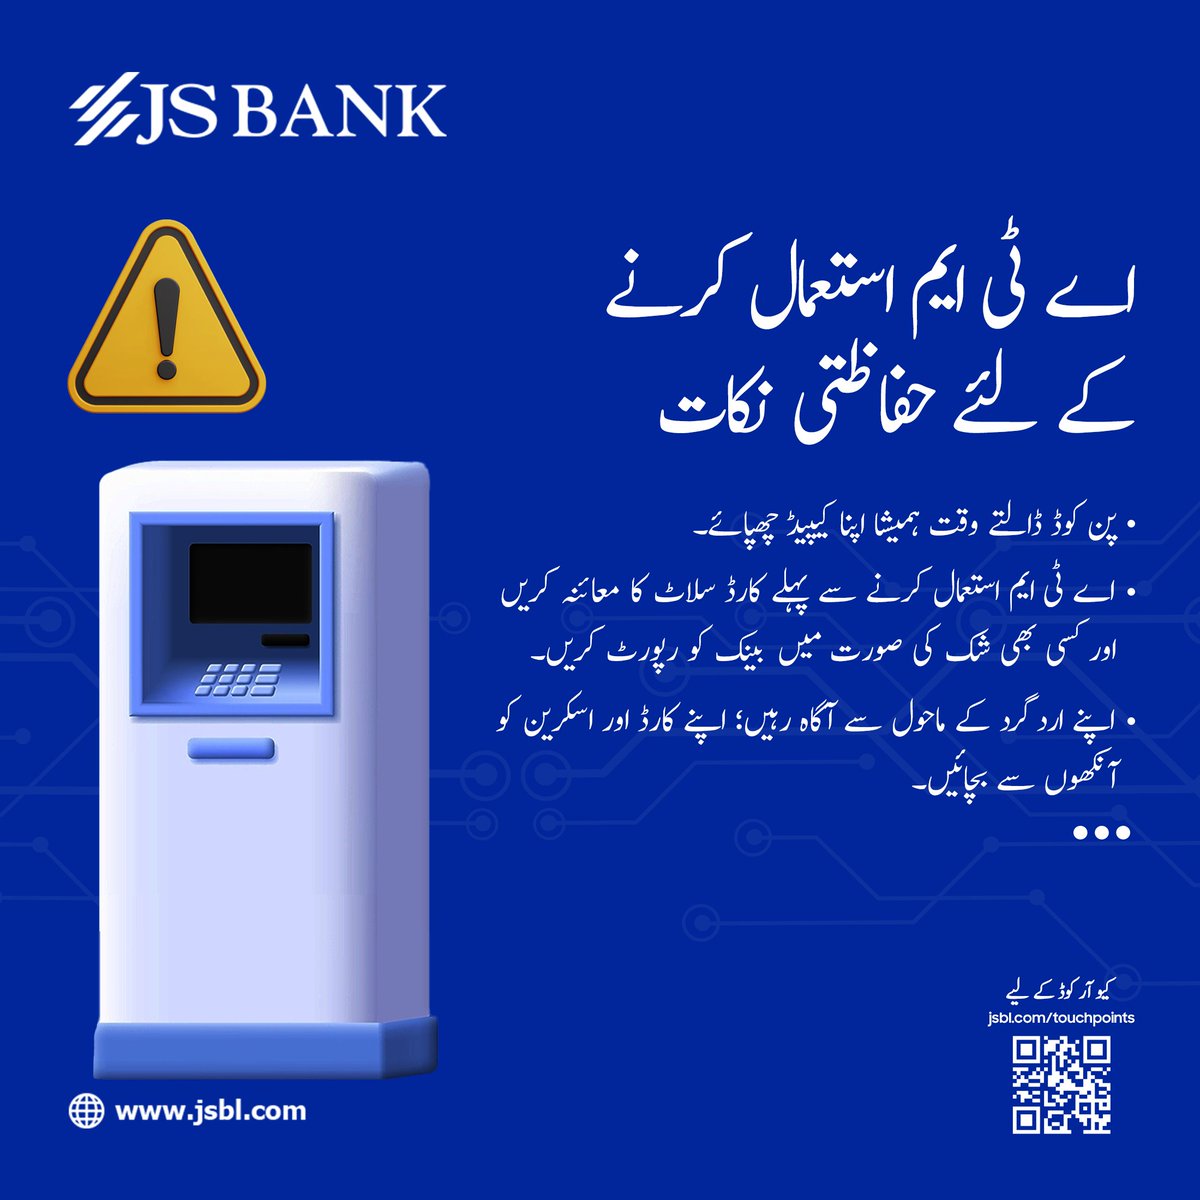 Ensure a safe transaction. Before inserting your card, inspect the ATM card slot for any irregularity. Report concerns to the bank promptly. Connect with us through our customer touchpoints: jsbl.com/customer-touch… #JSBank #BarhnaHaiAagay #JSCyberSafe #DigitalFraudProtection